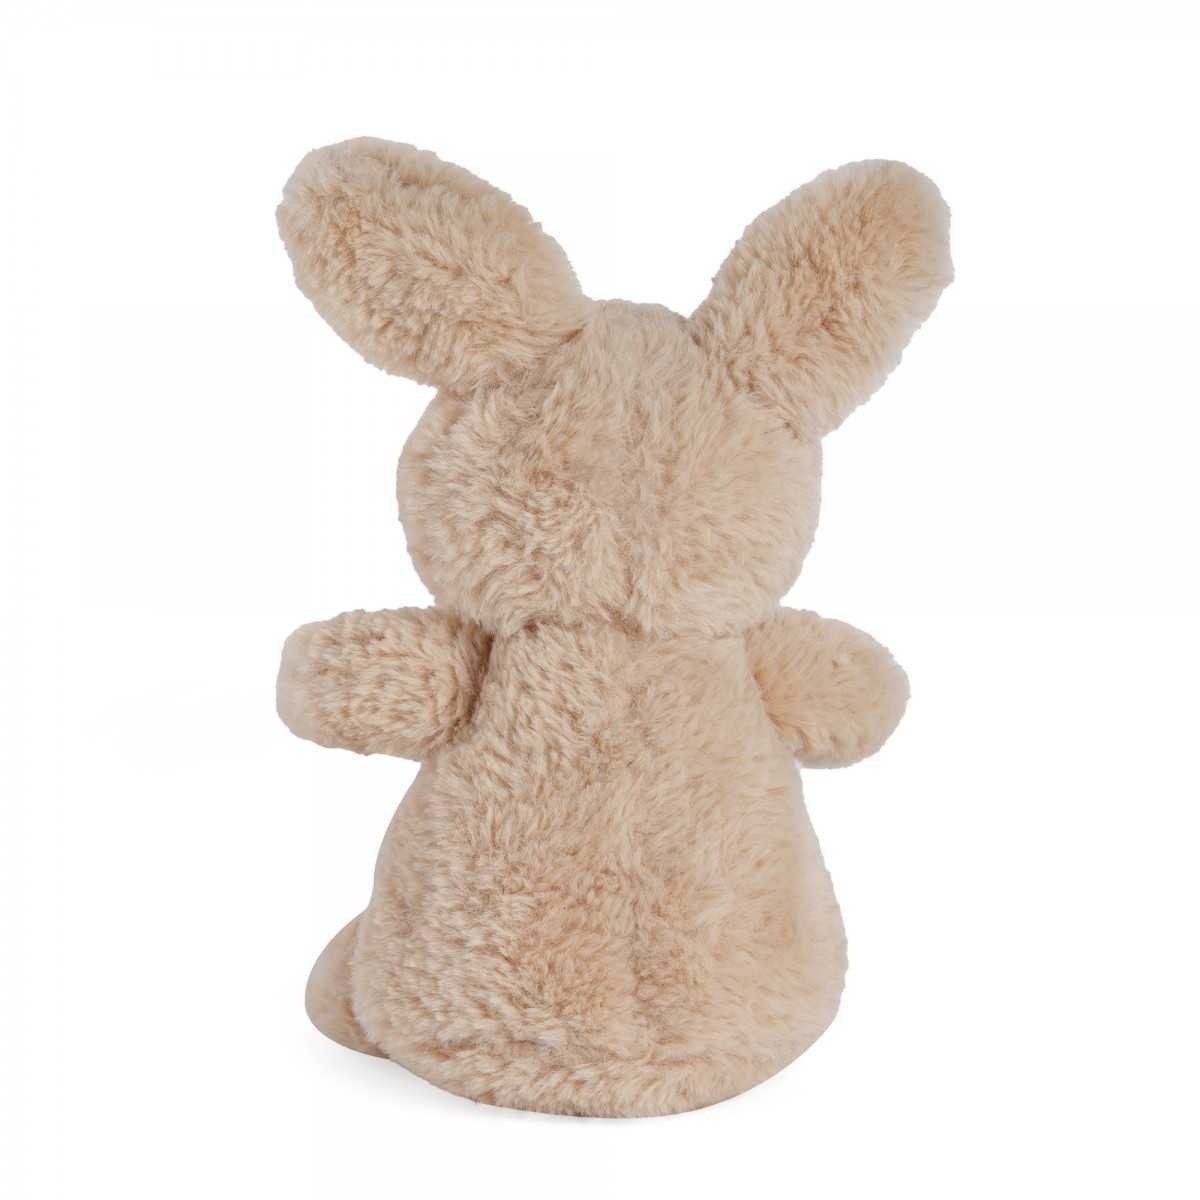 Huggable Cuddly Bunny Stuffed Toy By Fuzzbuzz, Soft Toys for Kids, Cute Plushies Beige, For Kids Of Age 2 Years & Above, 25 cm